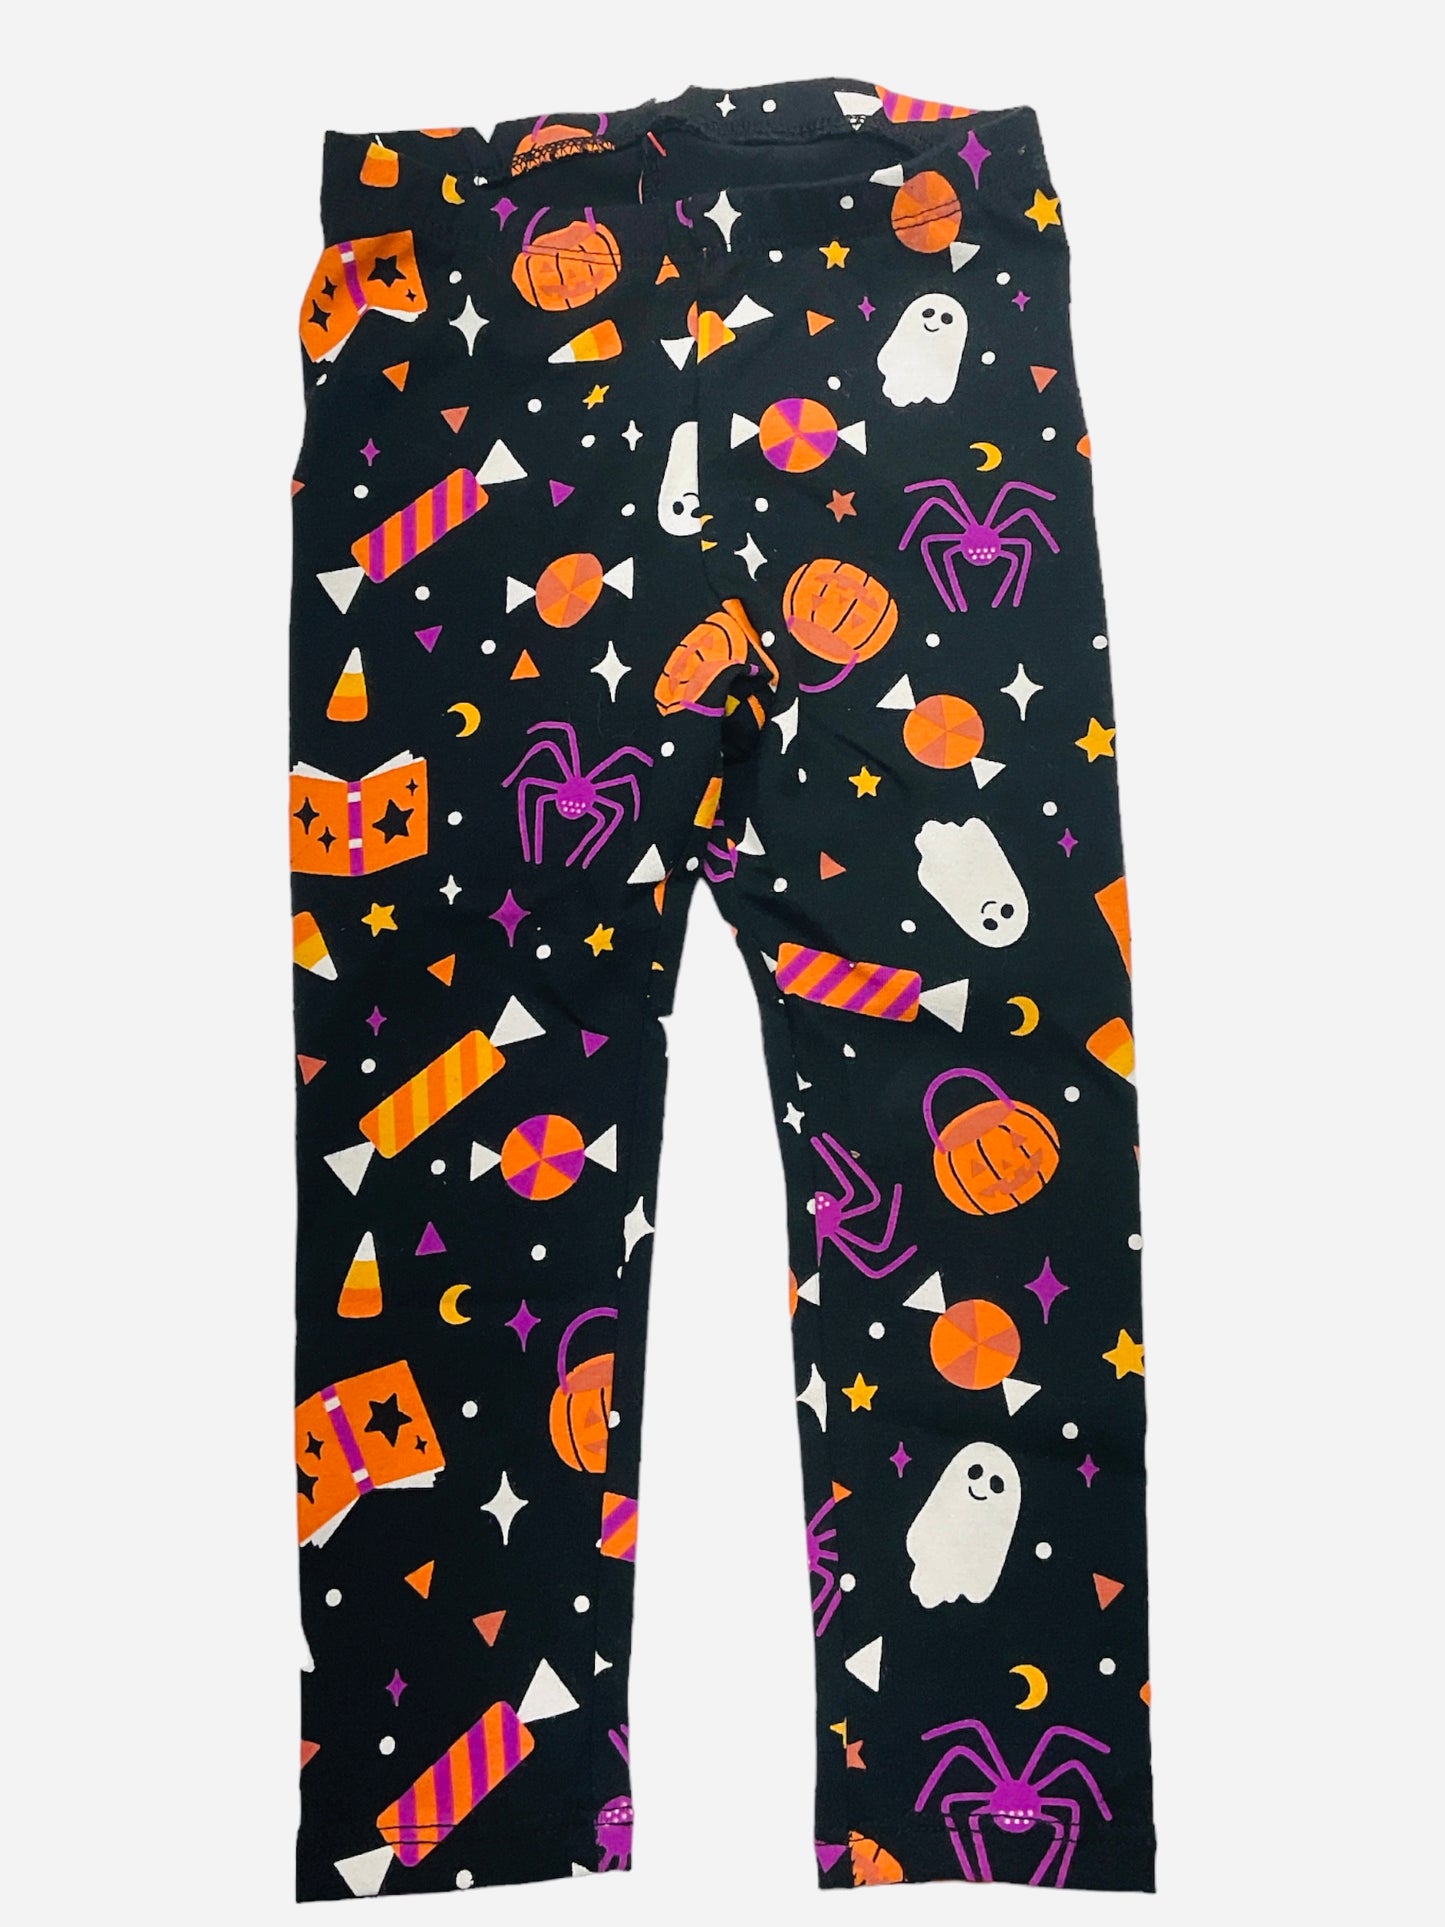 Cat and Jack Halloween Leggings (Size 2T)